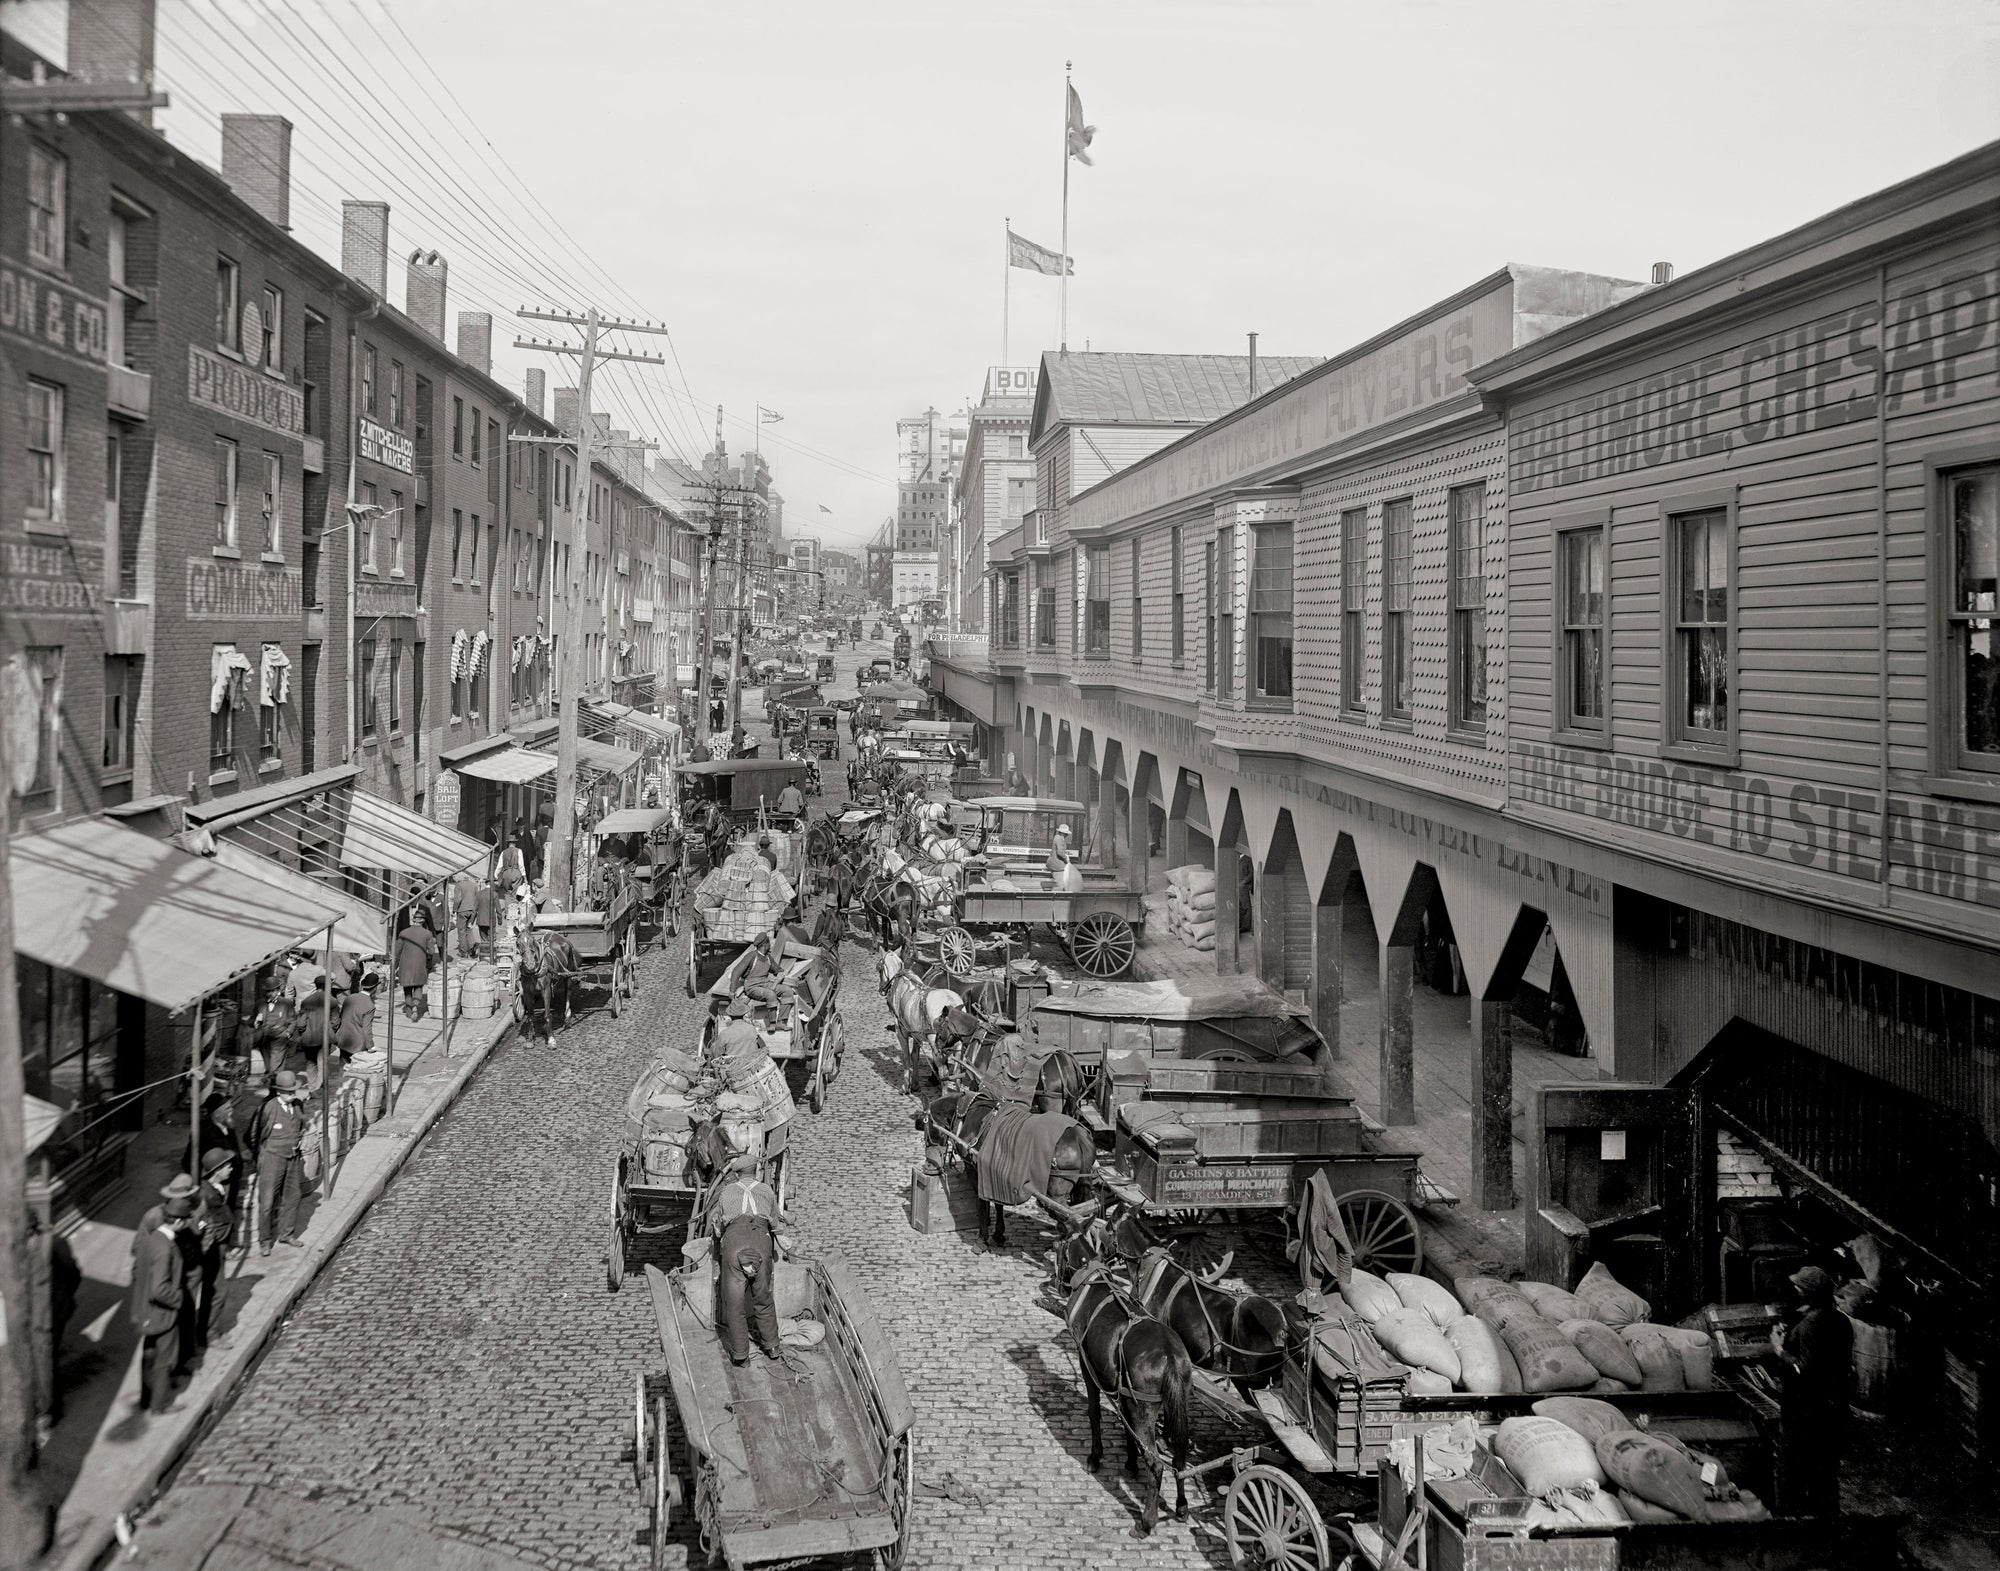 Baltimore, Maryland, Light Street looking North Historical Pix